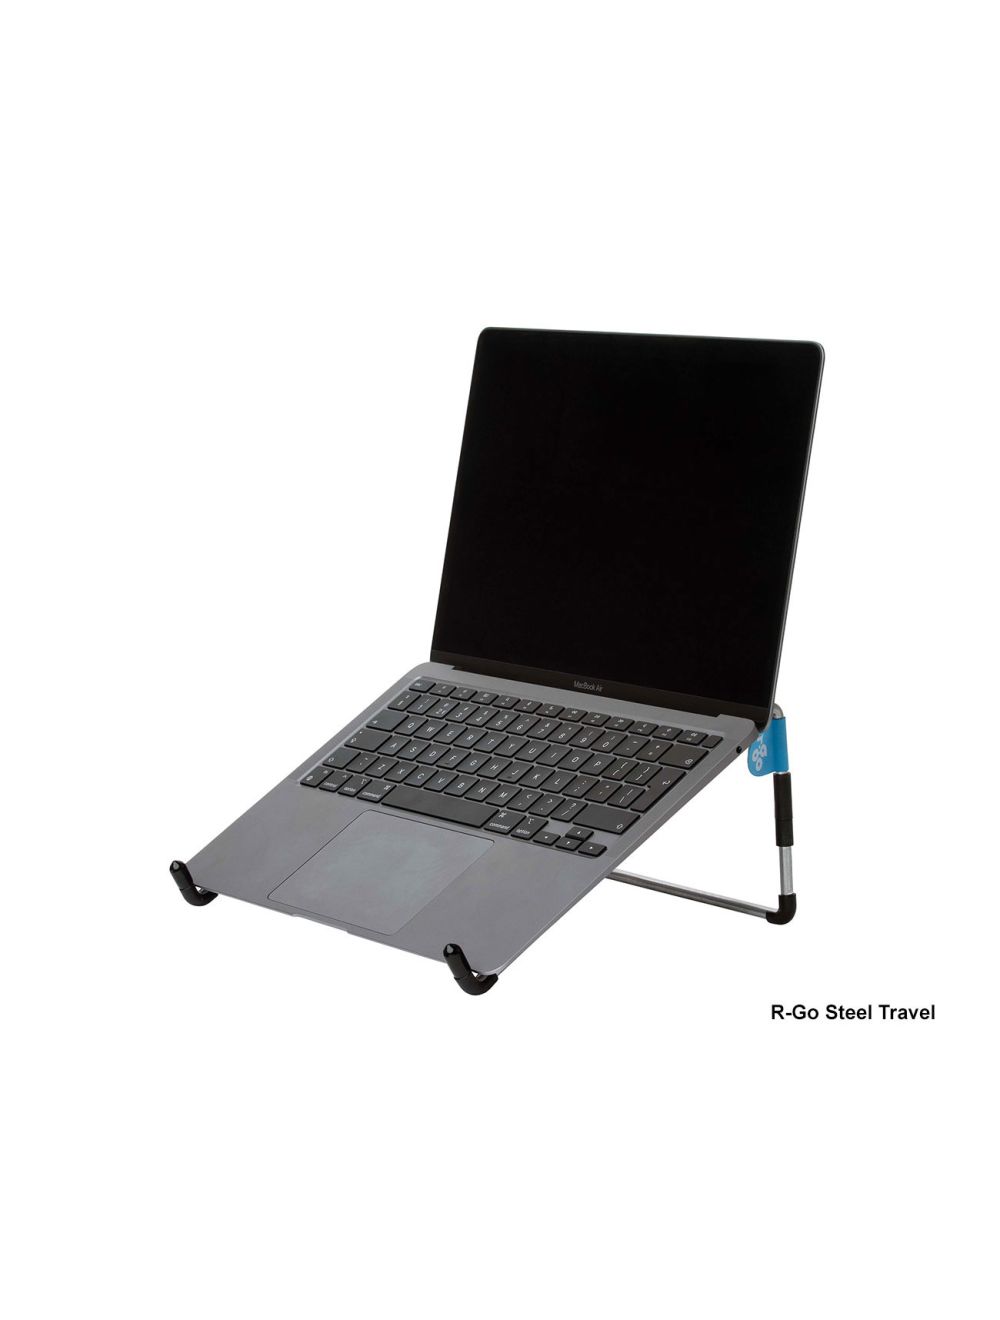 Laptop stand R-Go Steel Travel